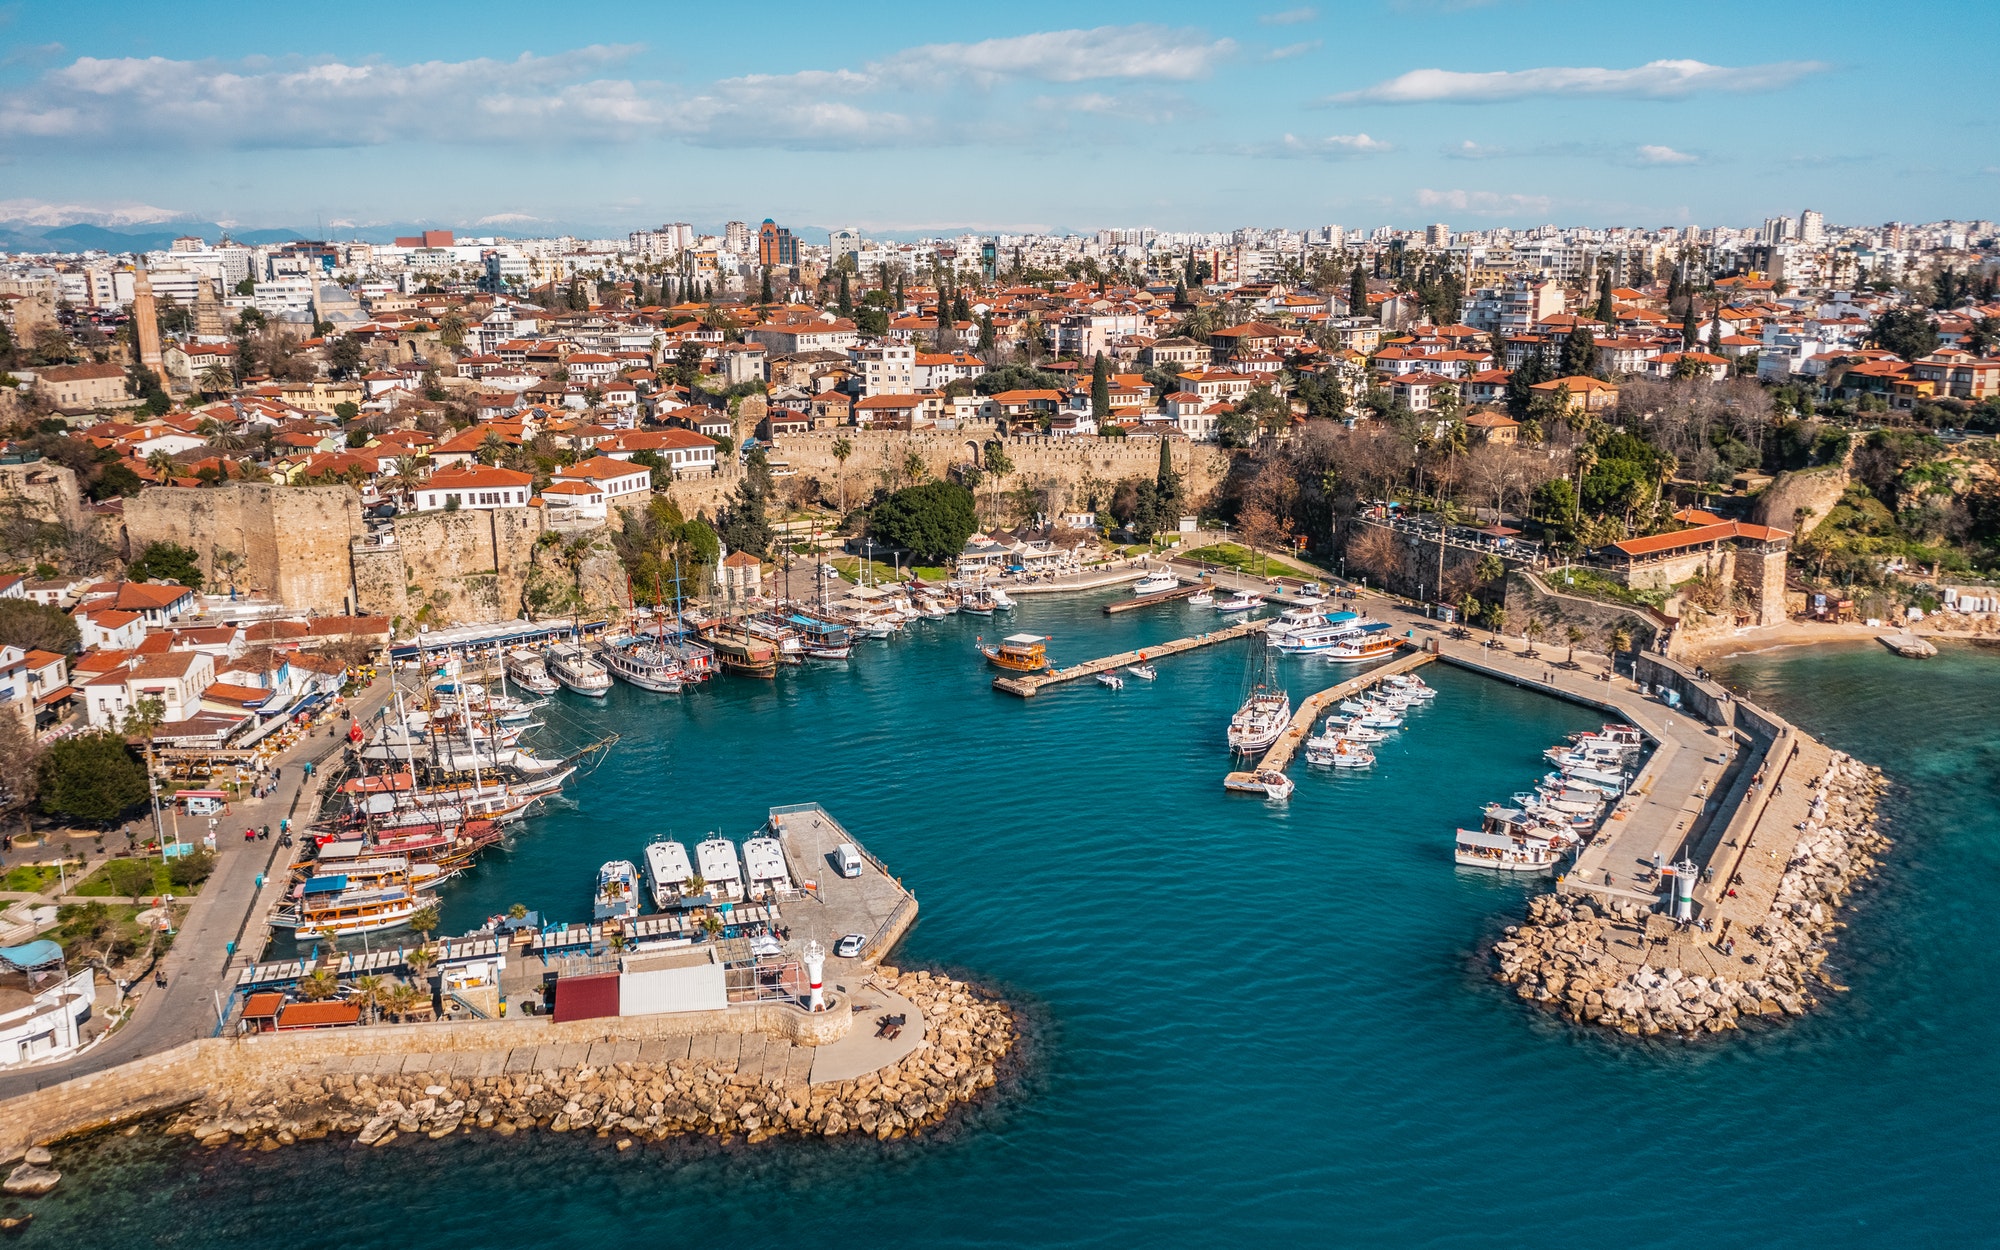 Aerial view of Antalya downtown